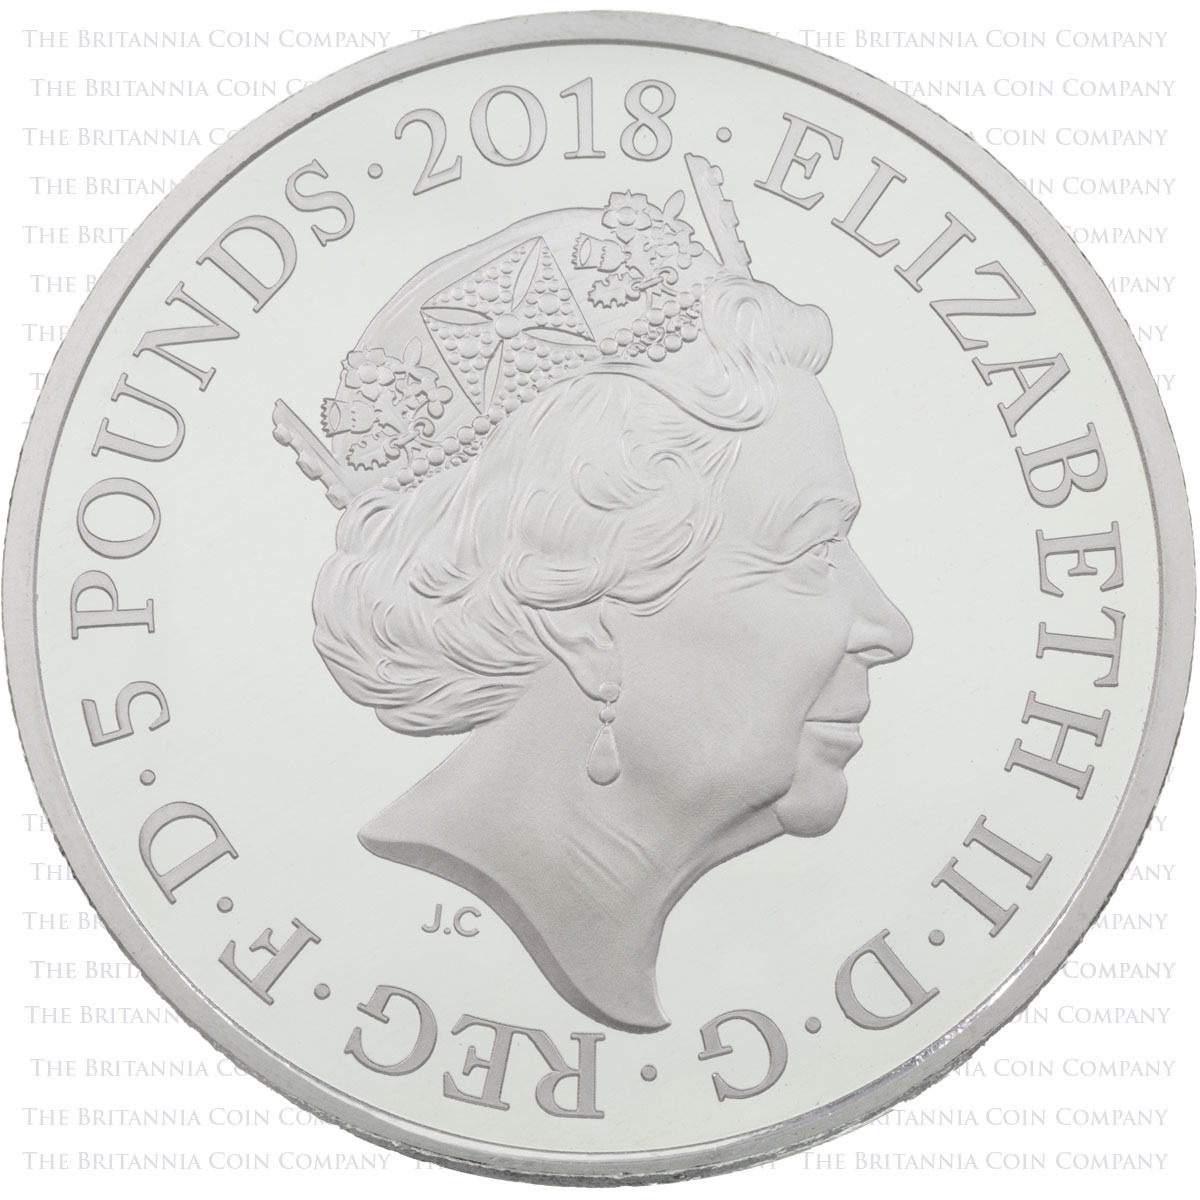 UK1870PL 2018 Charles Prince Of Wales 70th Birthday Five Pound Crown Piedfort Platinum Proof Coin Obverse